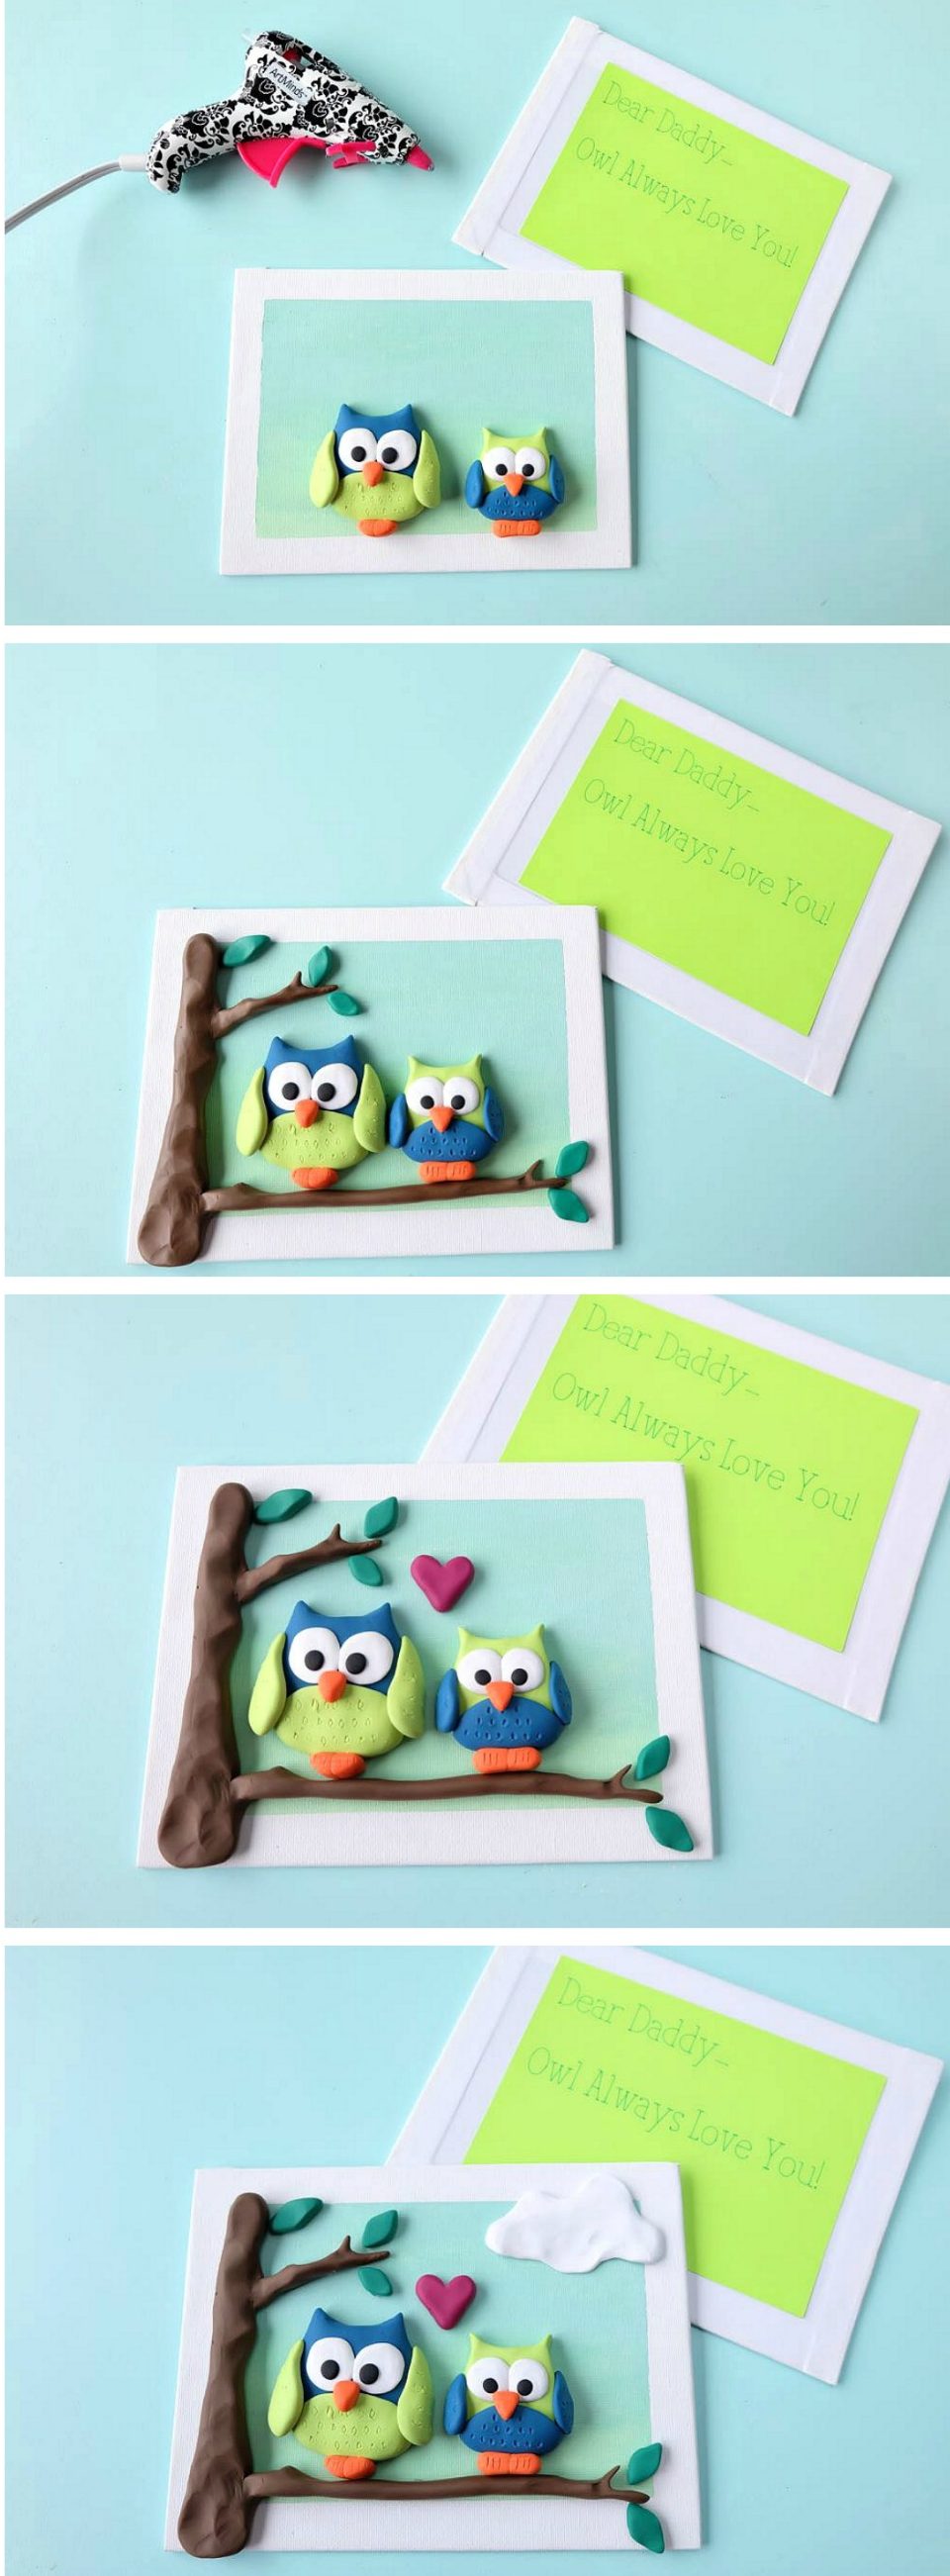 Make an adorable 4D greeting card using polymer clay and a dollar store artist canvas. This project makes a fabulous greeting card for Fathers Day, Mothers Day, Birthdays or any other fun occasion! Easy enough for kids to craft!